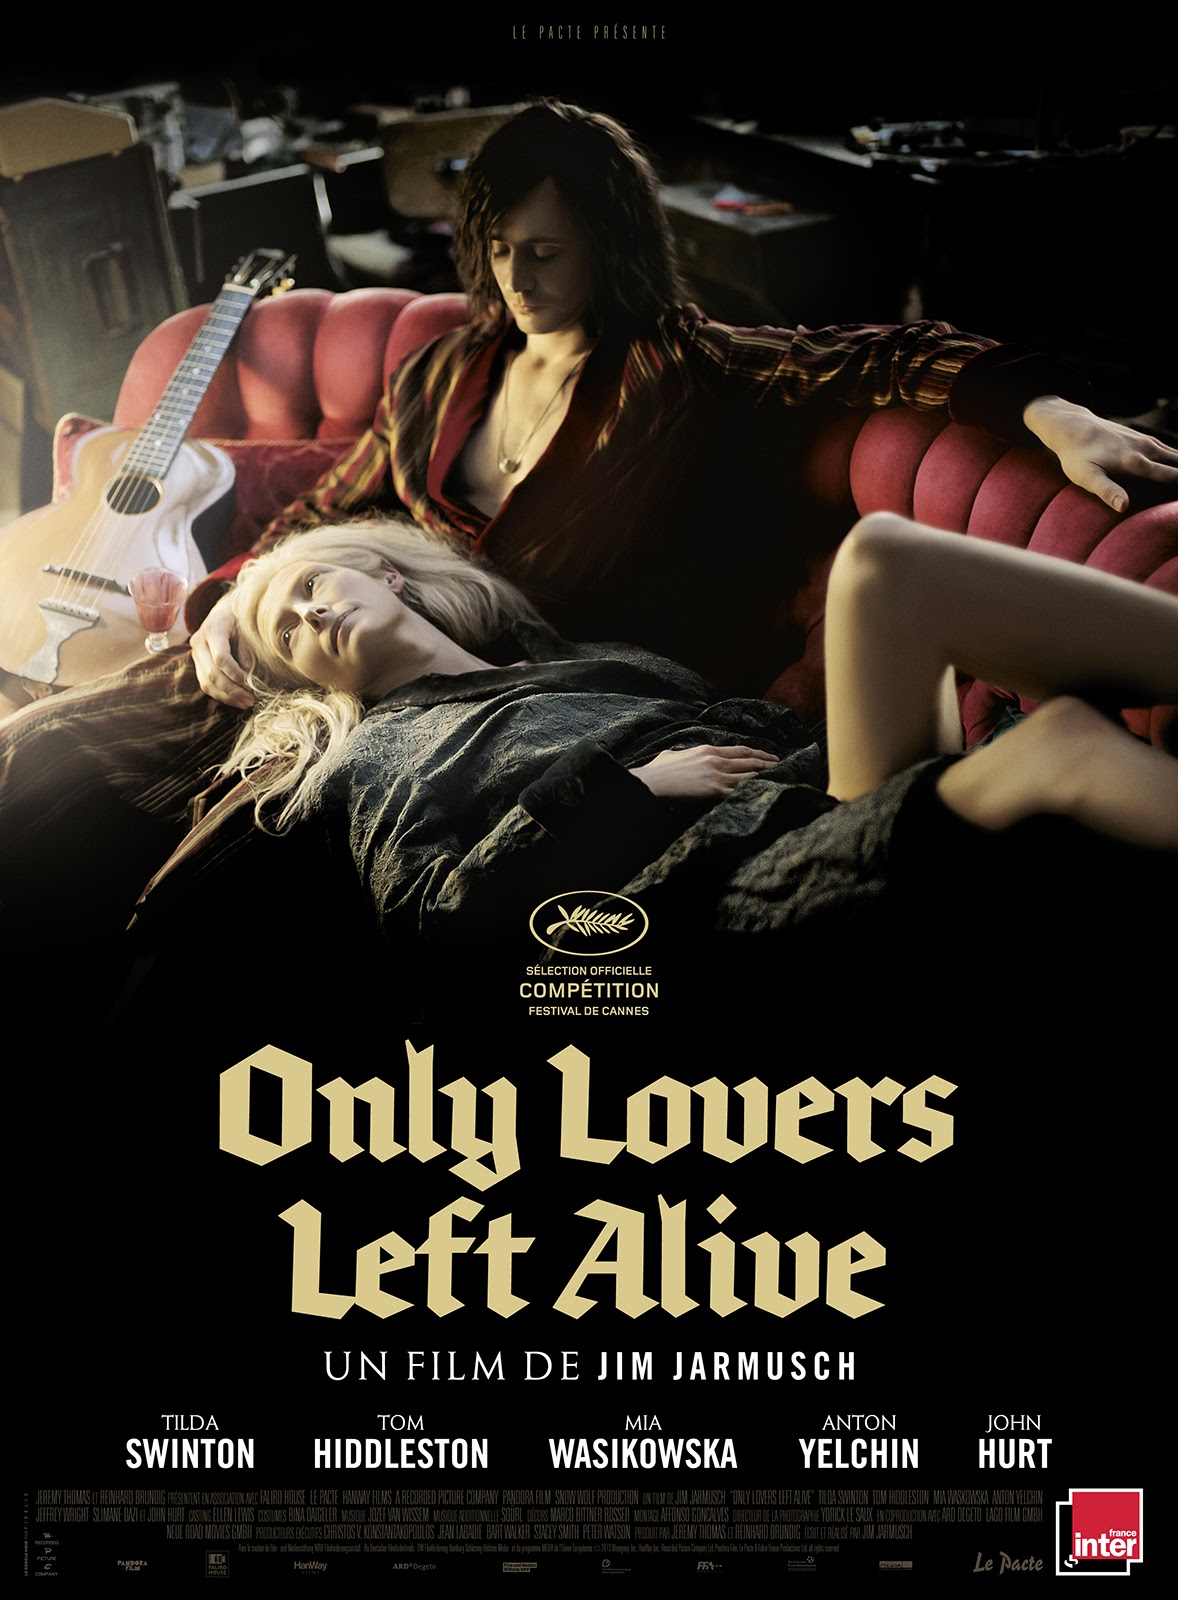 http://fuckingcinephiles.blogspot.fr/2014/02/critique-only-lovers-left-alive.html